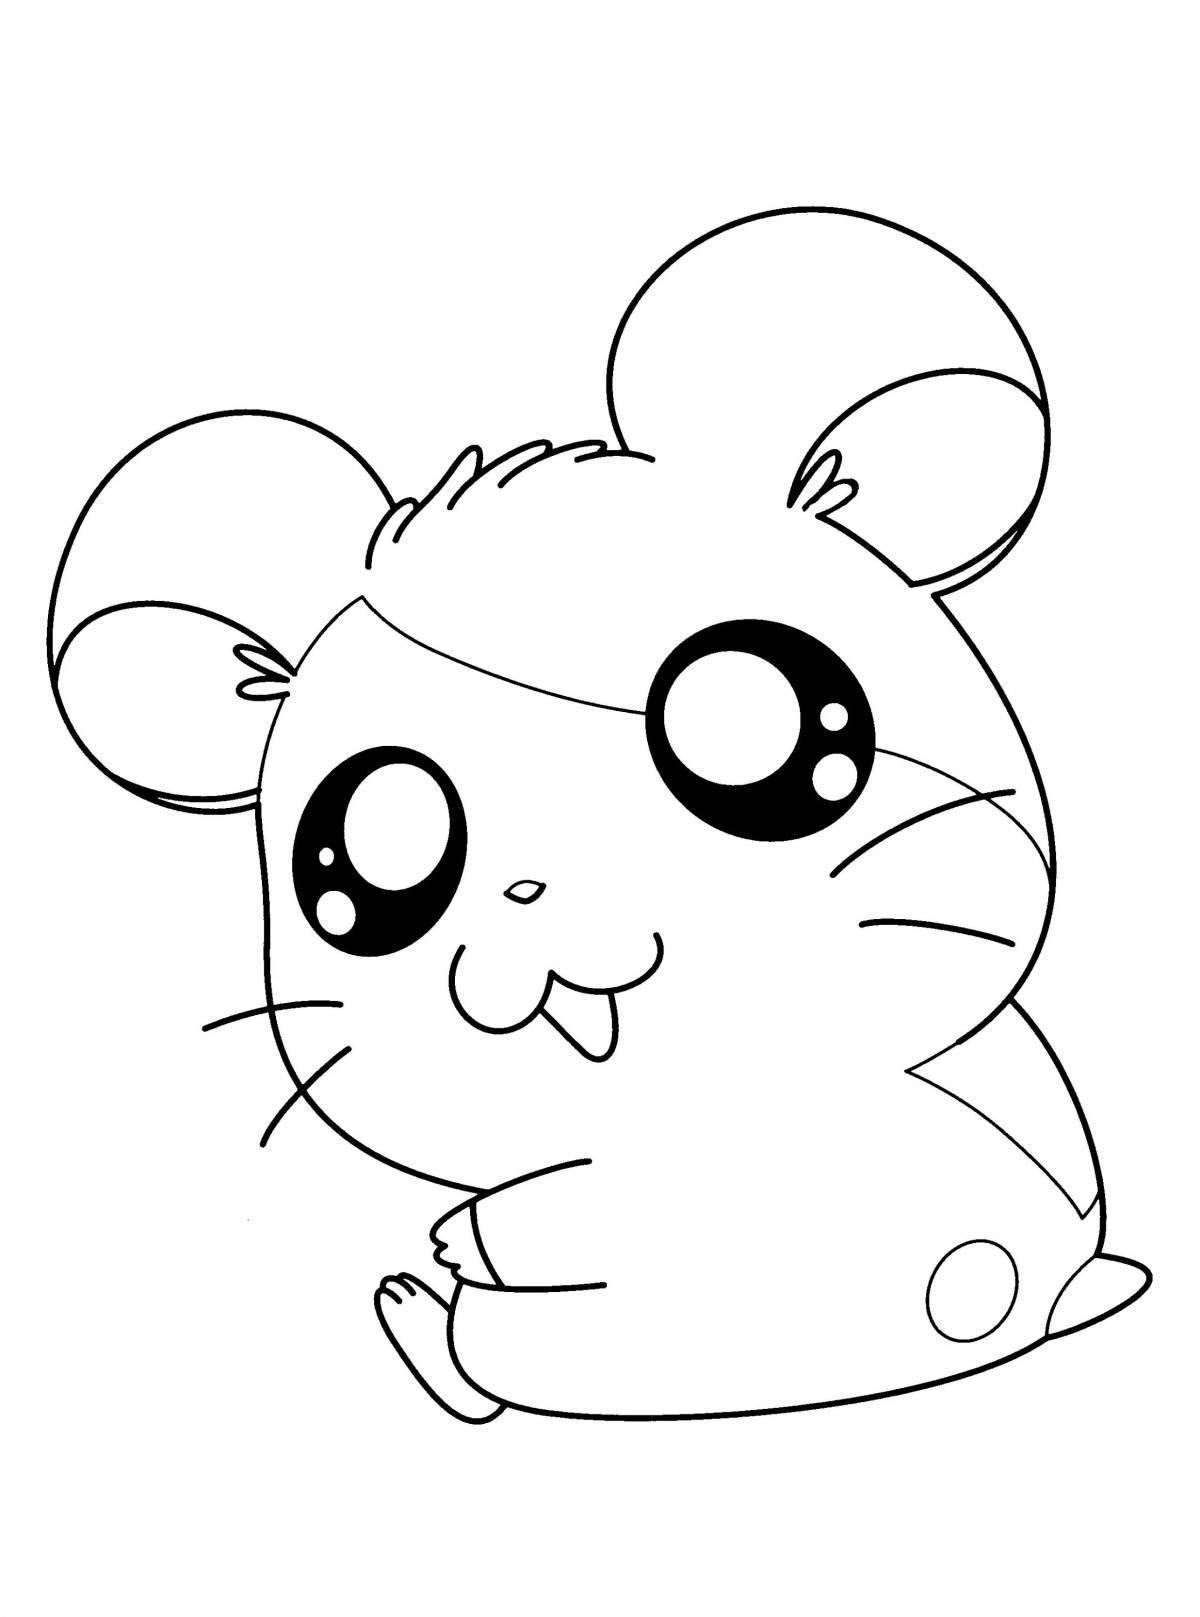 Coloring book inquisitive hamster